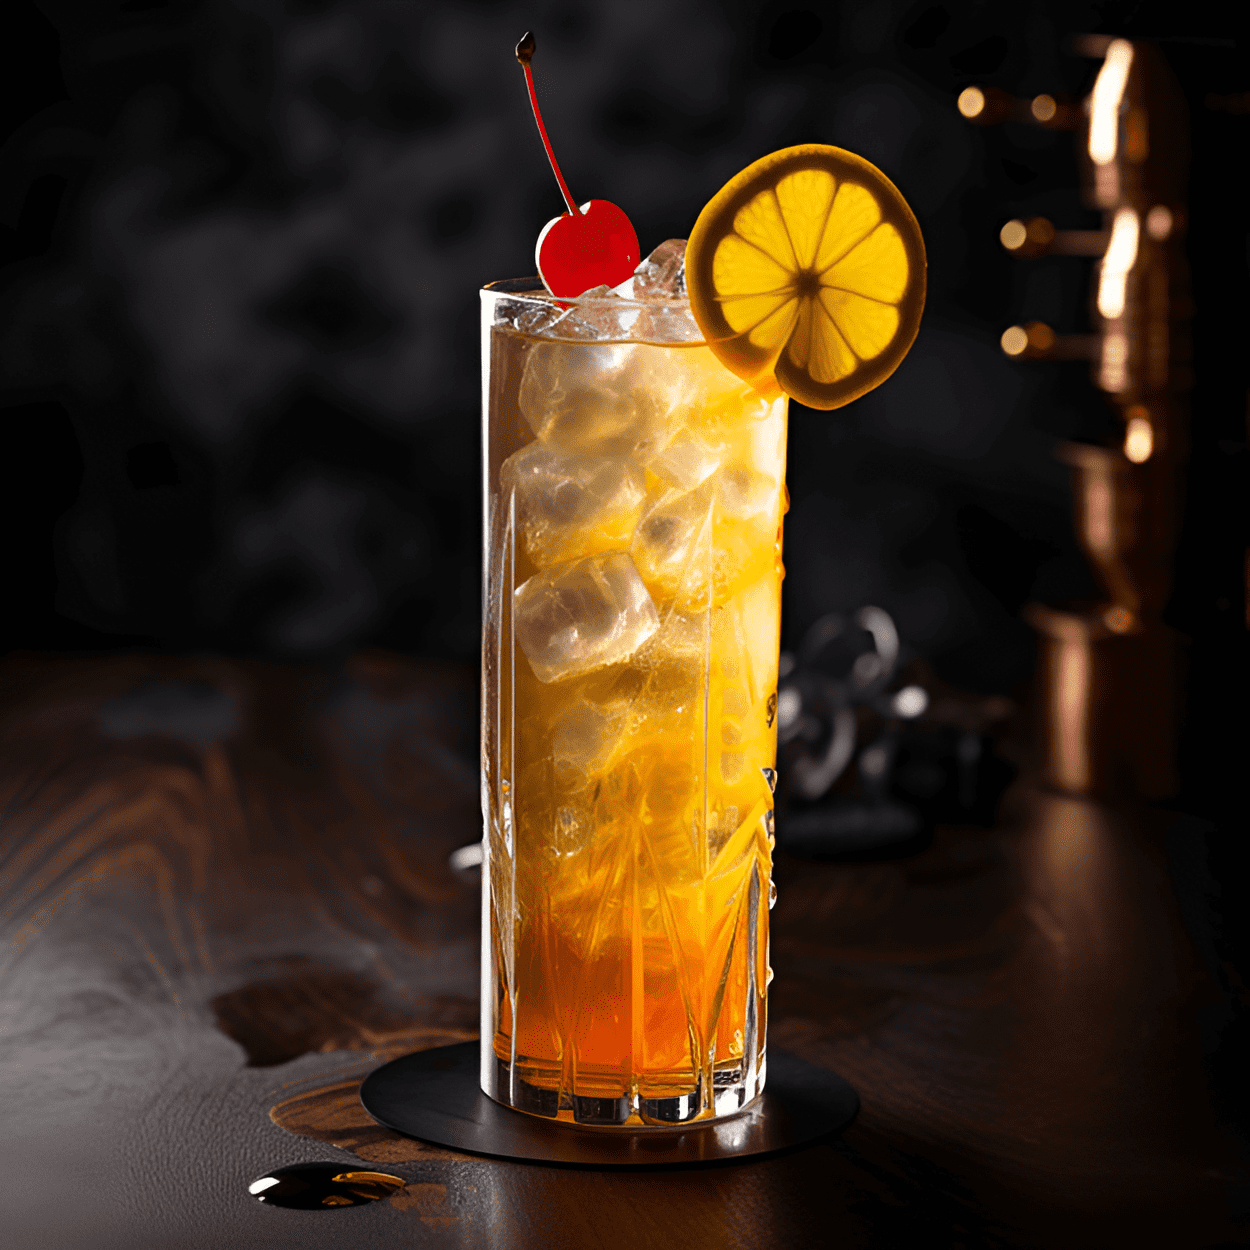 Last Call Cocktail Recipe - The Last Call cocktail has a strong, robust flavor with a hint of sweetness. The taste is complex, with the bitterness of the alcohol balanced by the sweetness of the sugar and the tartness of the citrus.